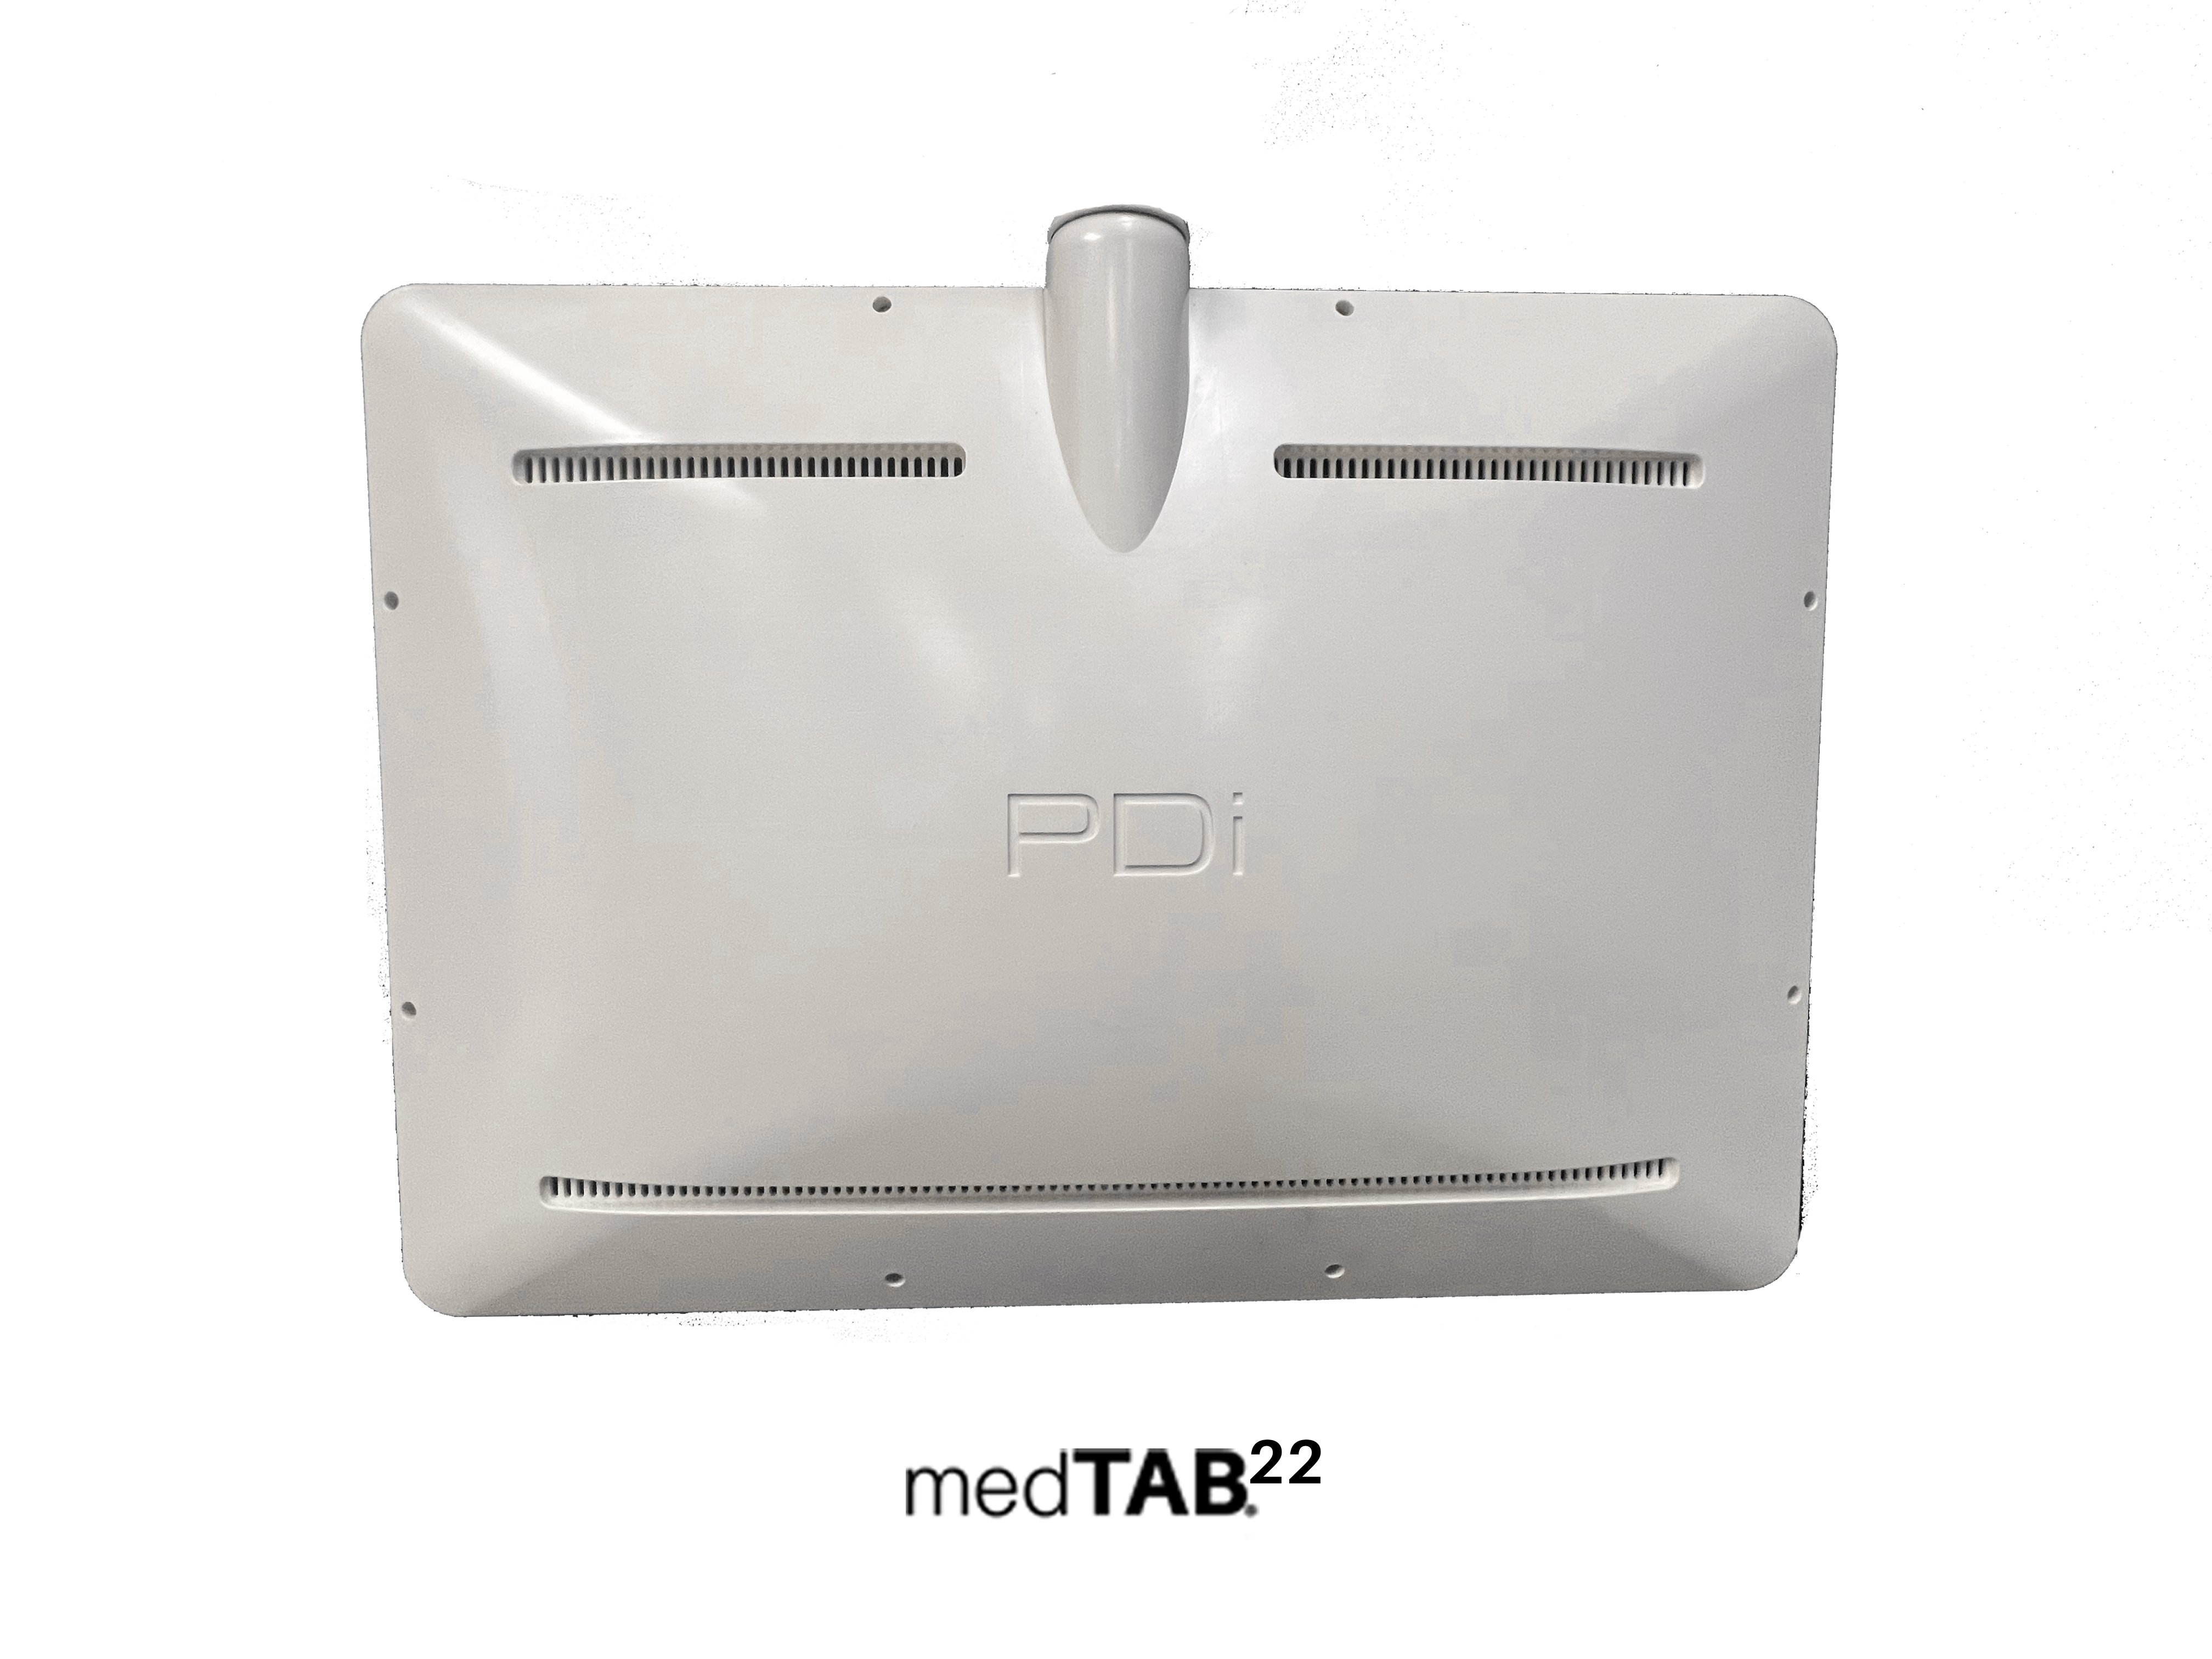 PDi medTAB22 Personal Smart Touch Screen Patient TV - Back view